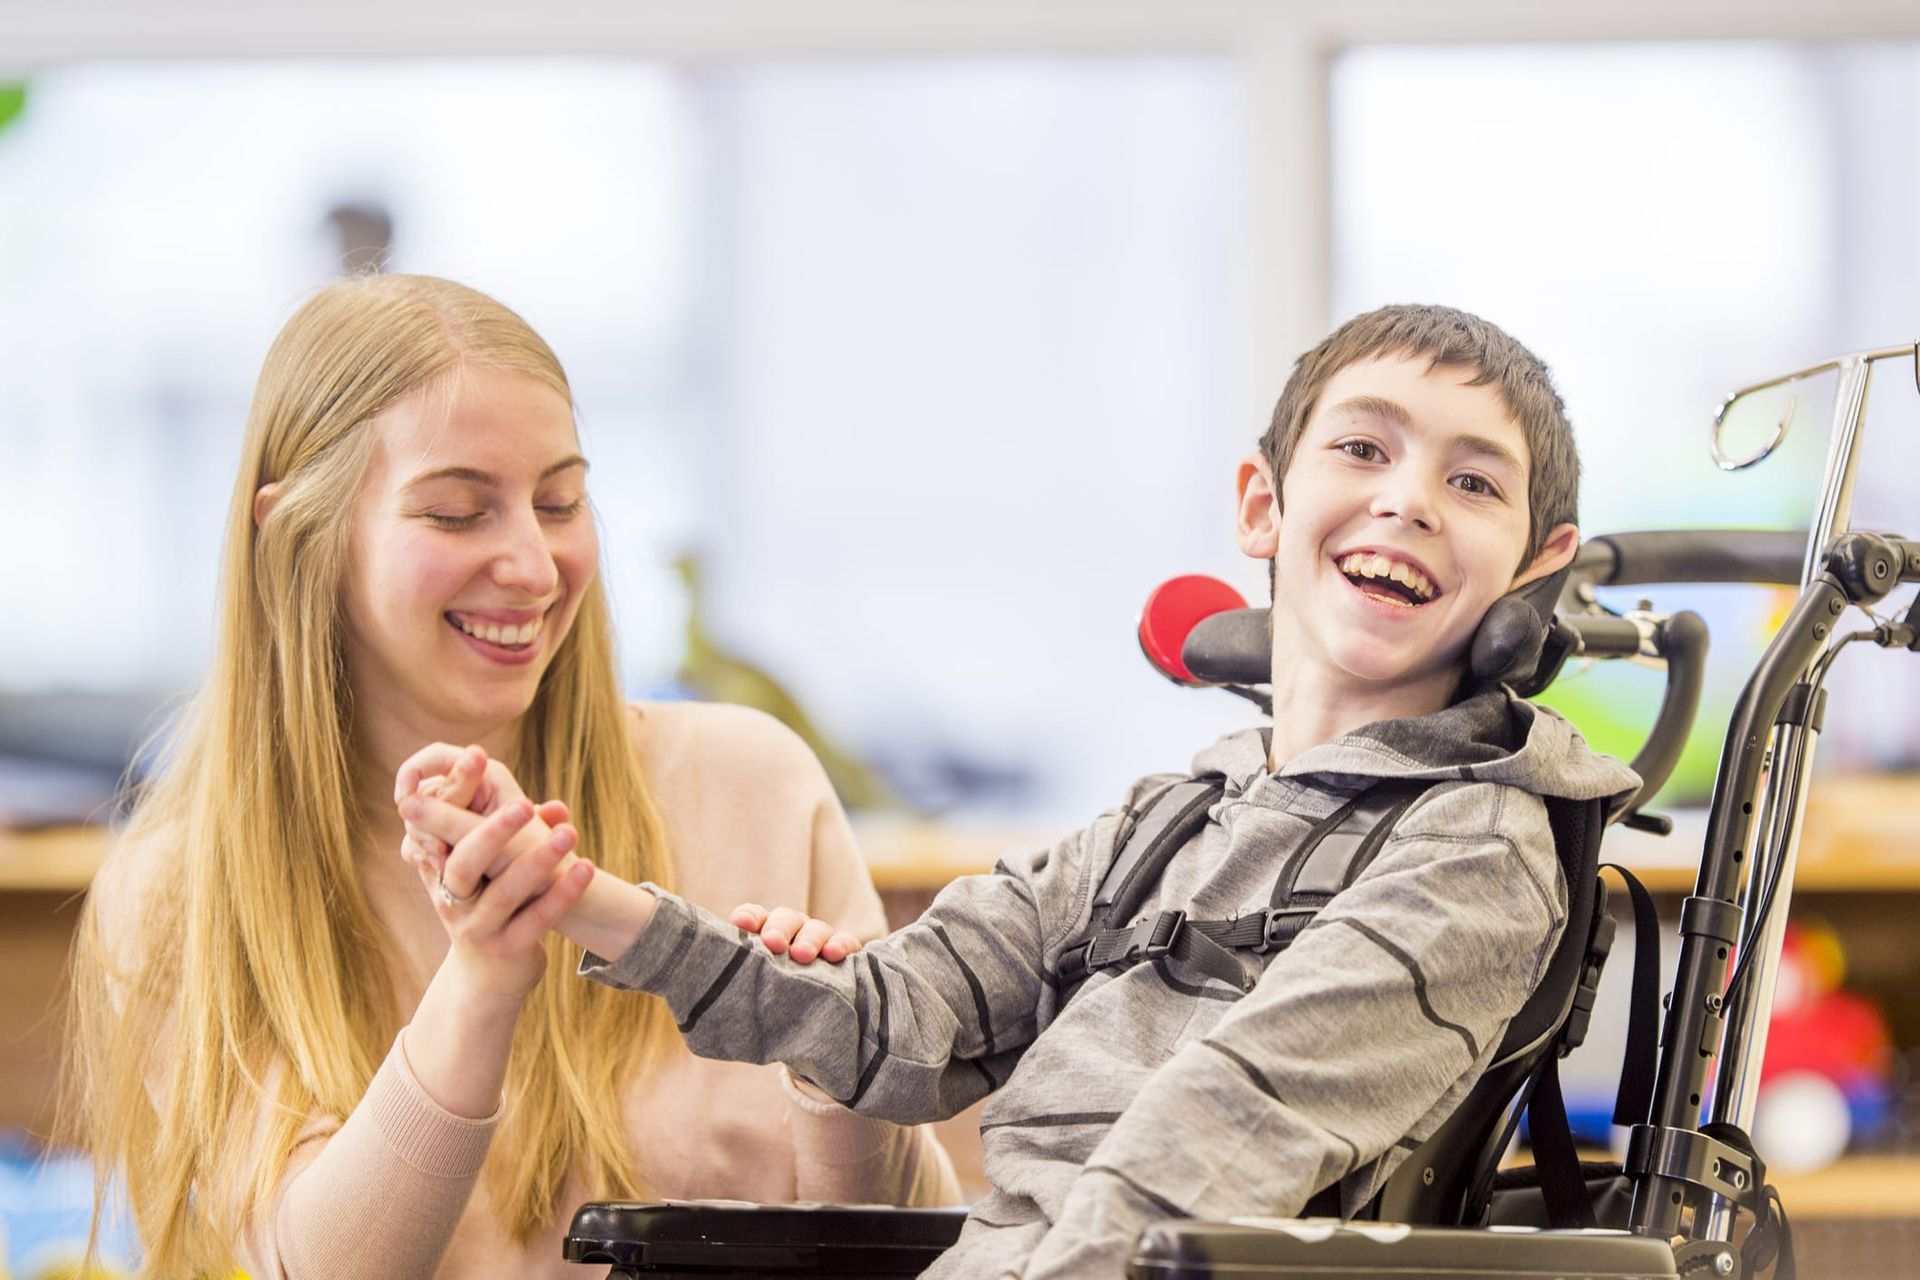 Young boy with cerebral palsy joyfully smiling while being assisted by blonde lady support worker